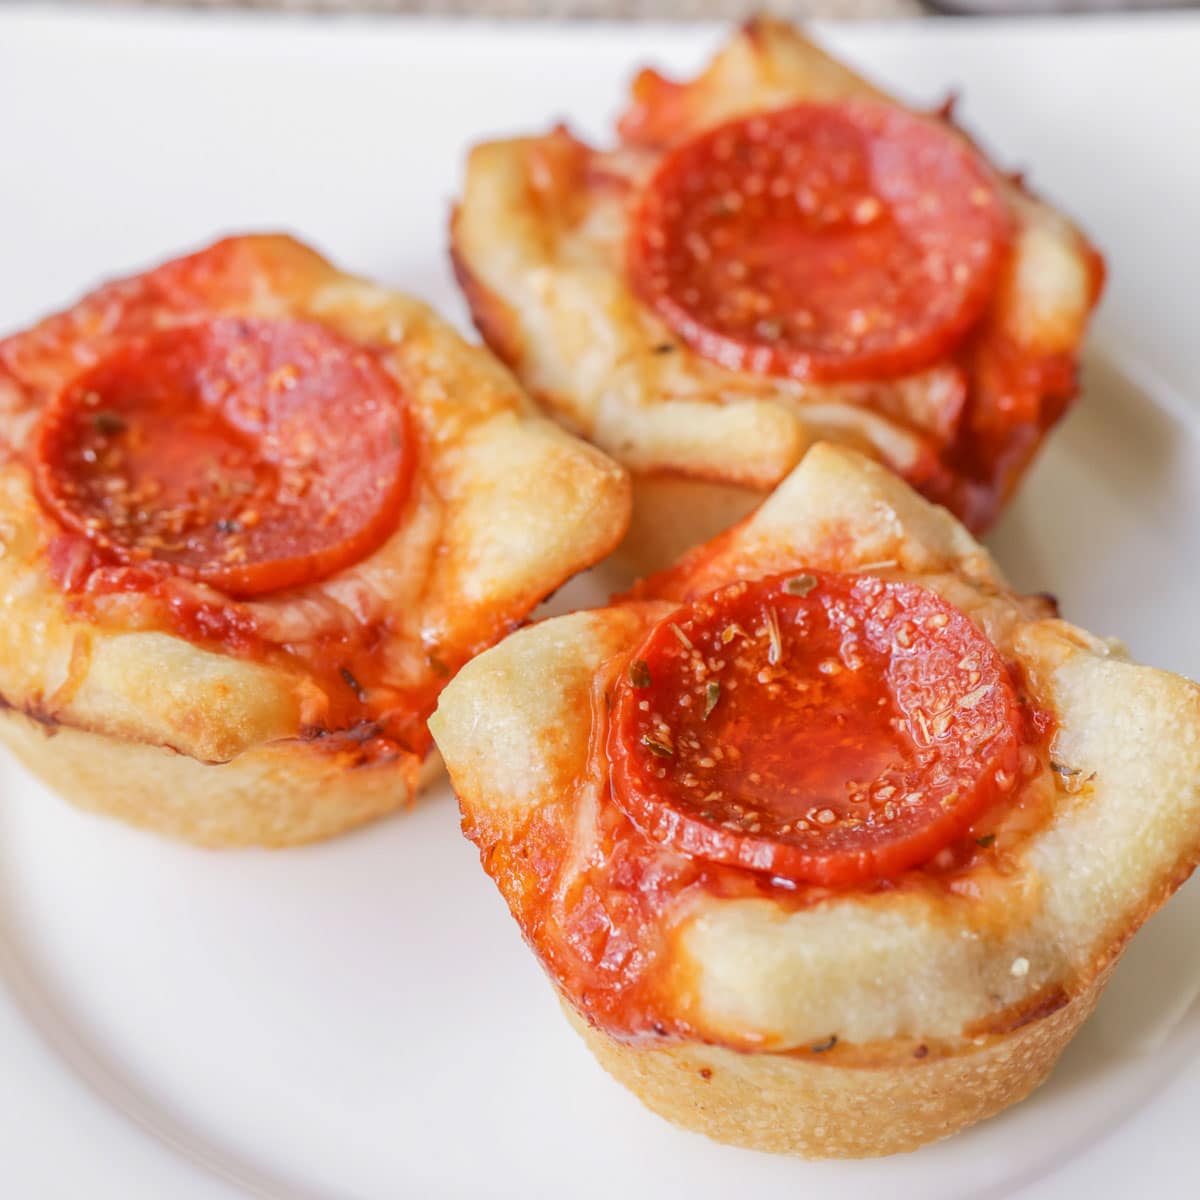 New Year's Eve Appetizers - mini deep dish pizzas topped with pepperoni.